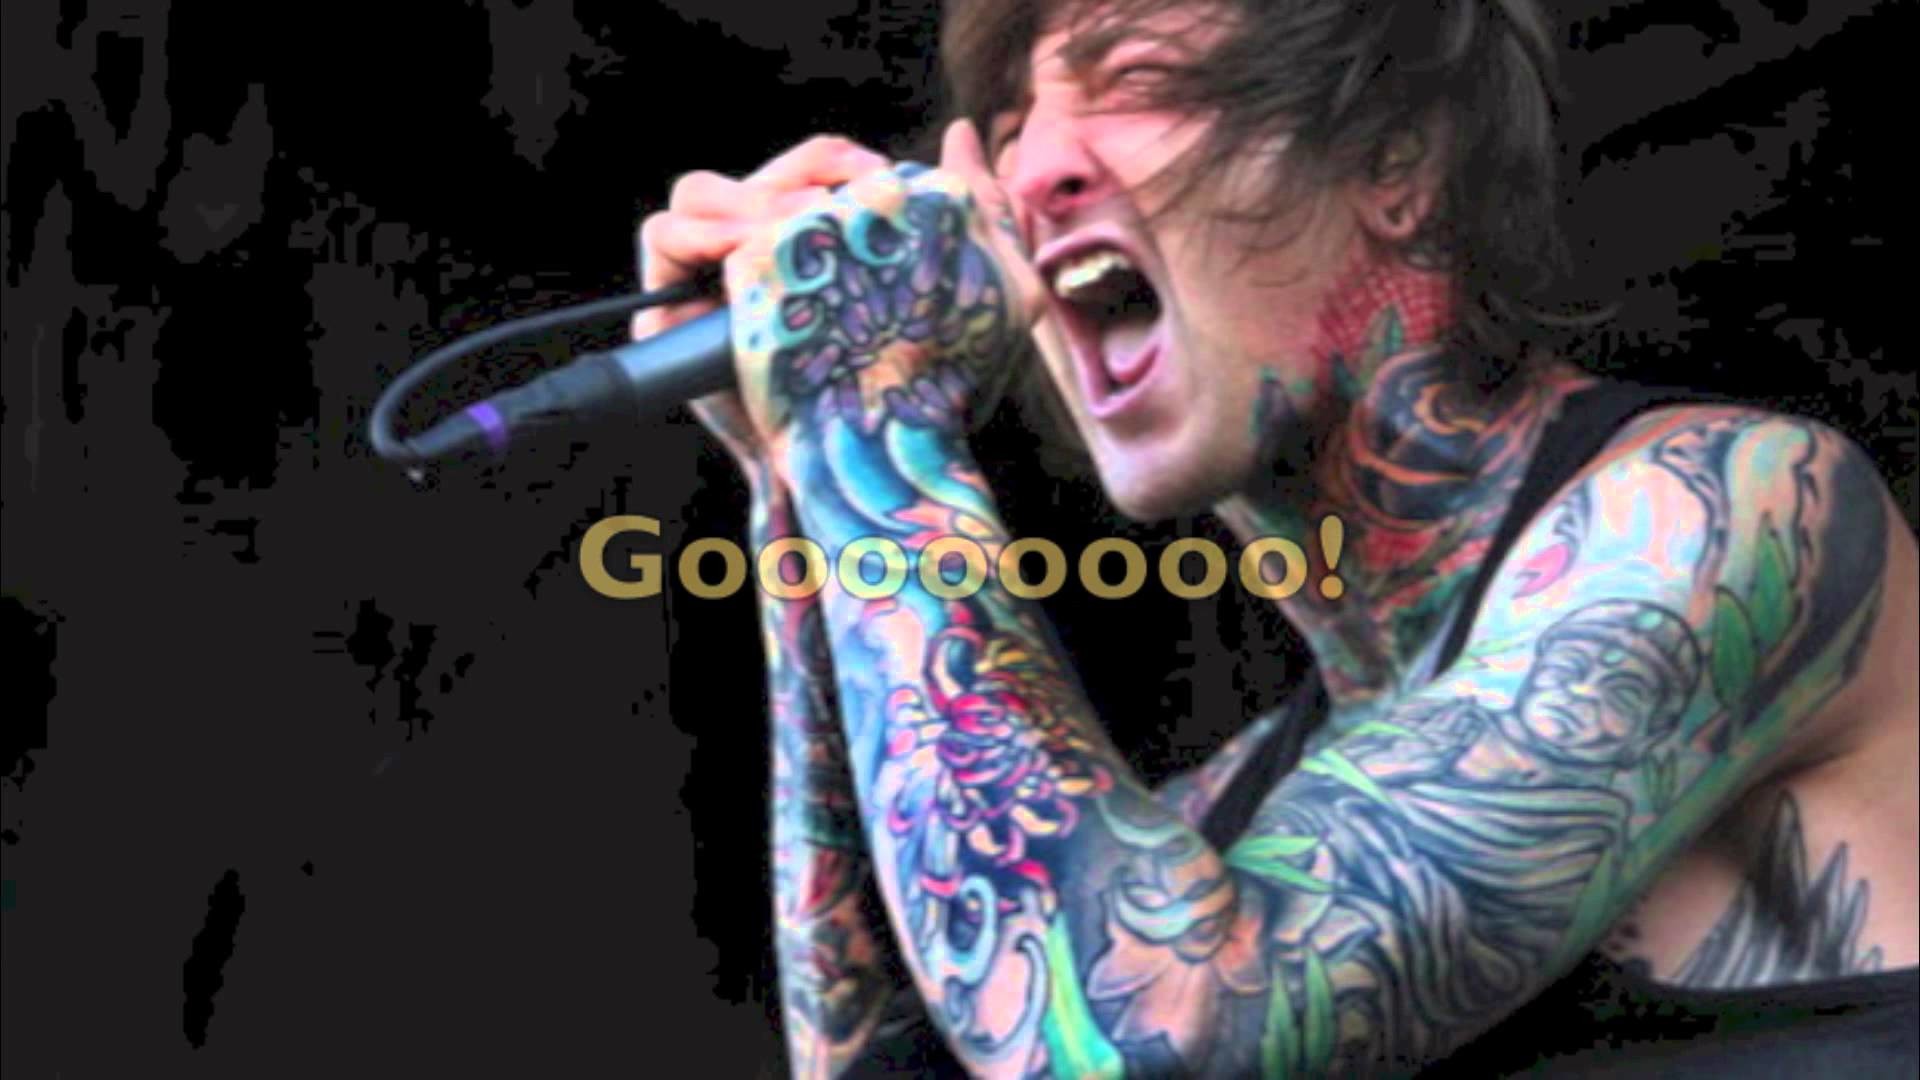 1920x1080 Suicide silence Y.O.L.O lyric video/Mitch lucker tribute